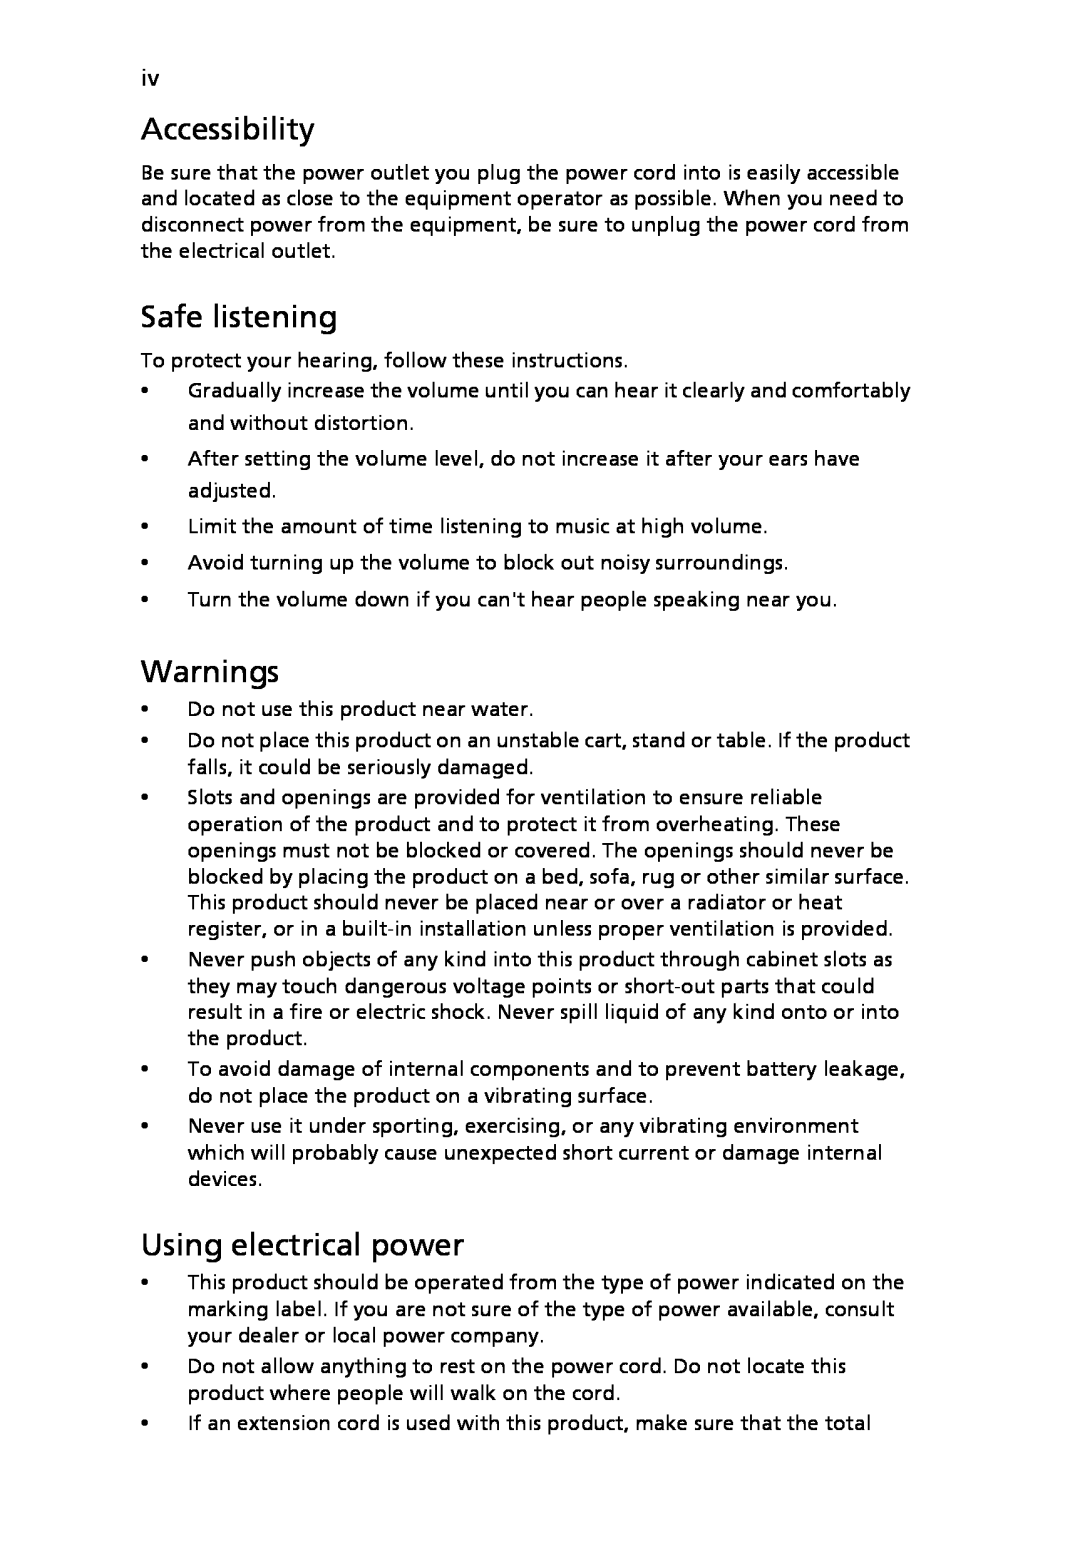 Acer V193 manual Accessibility, Safe listening, Warnings, Using electrical power 